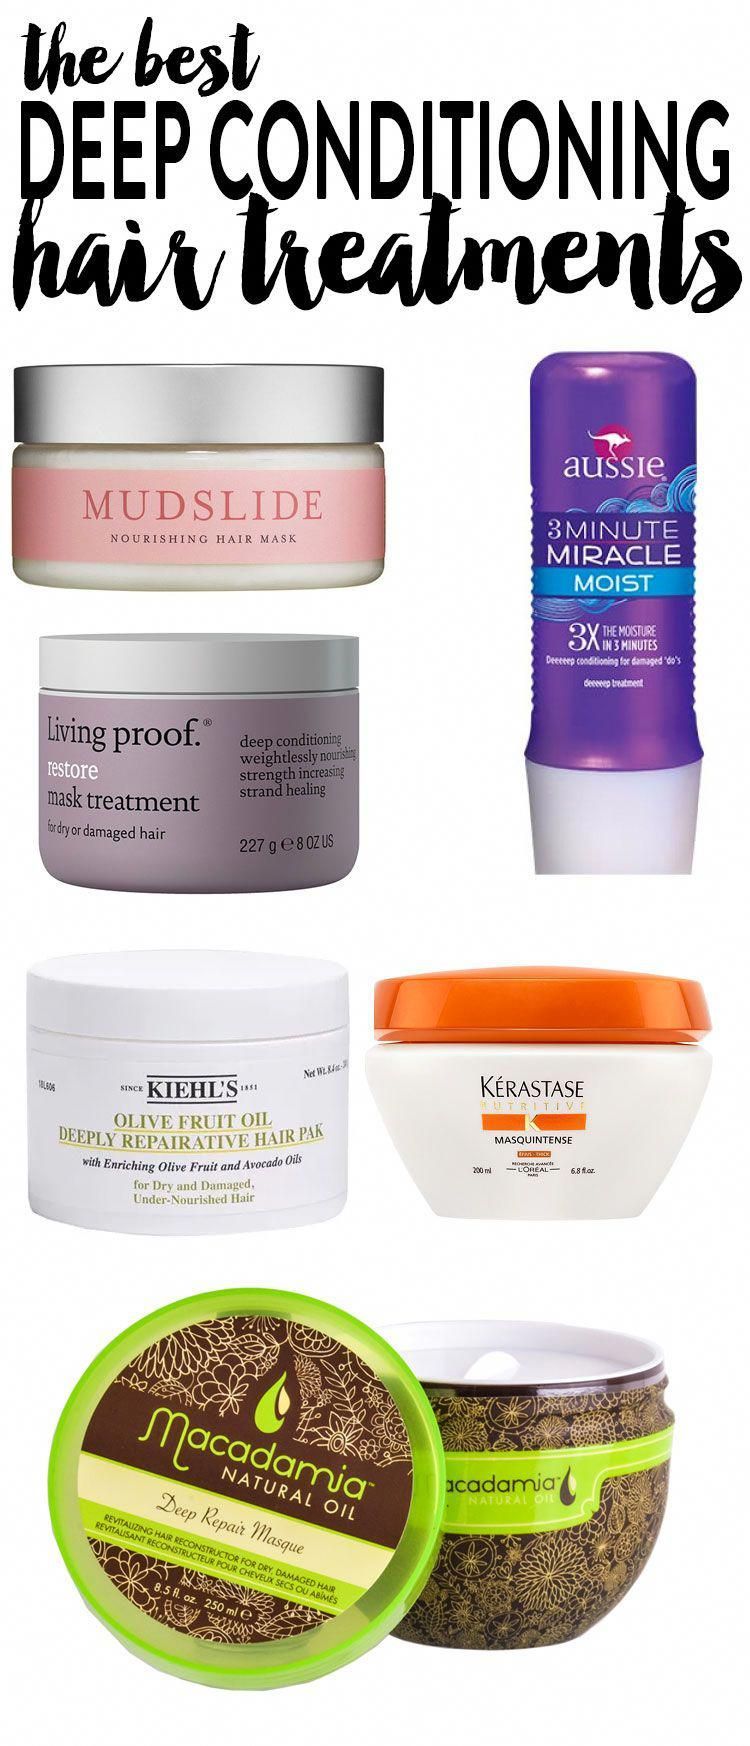 The Best Deep Conditioning Hair Treatments -   14 hair Care deep conditioning
 ideas